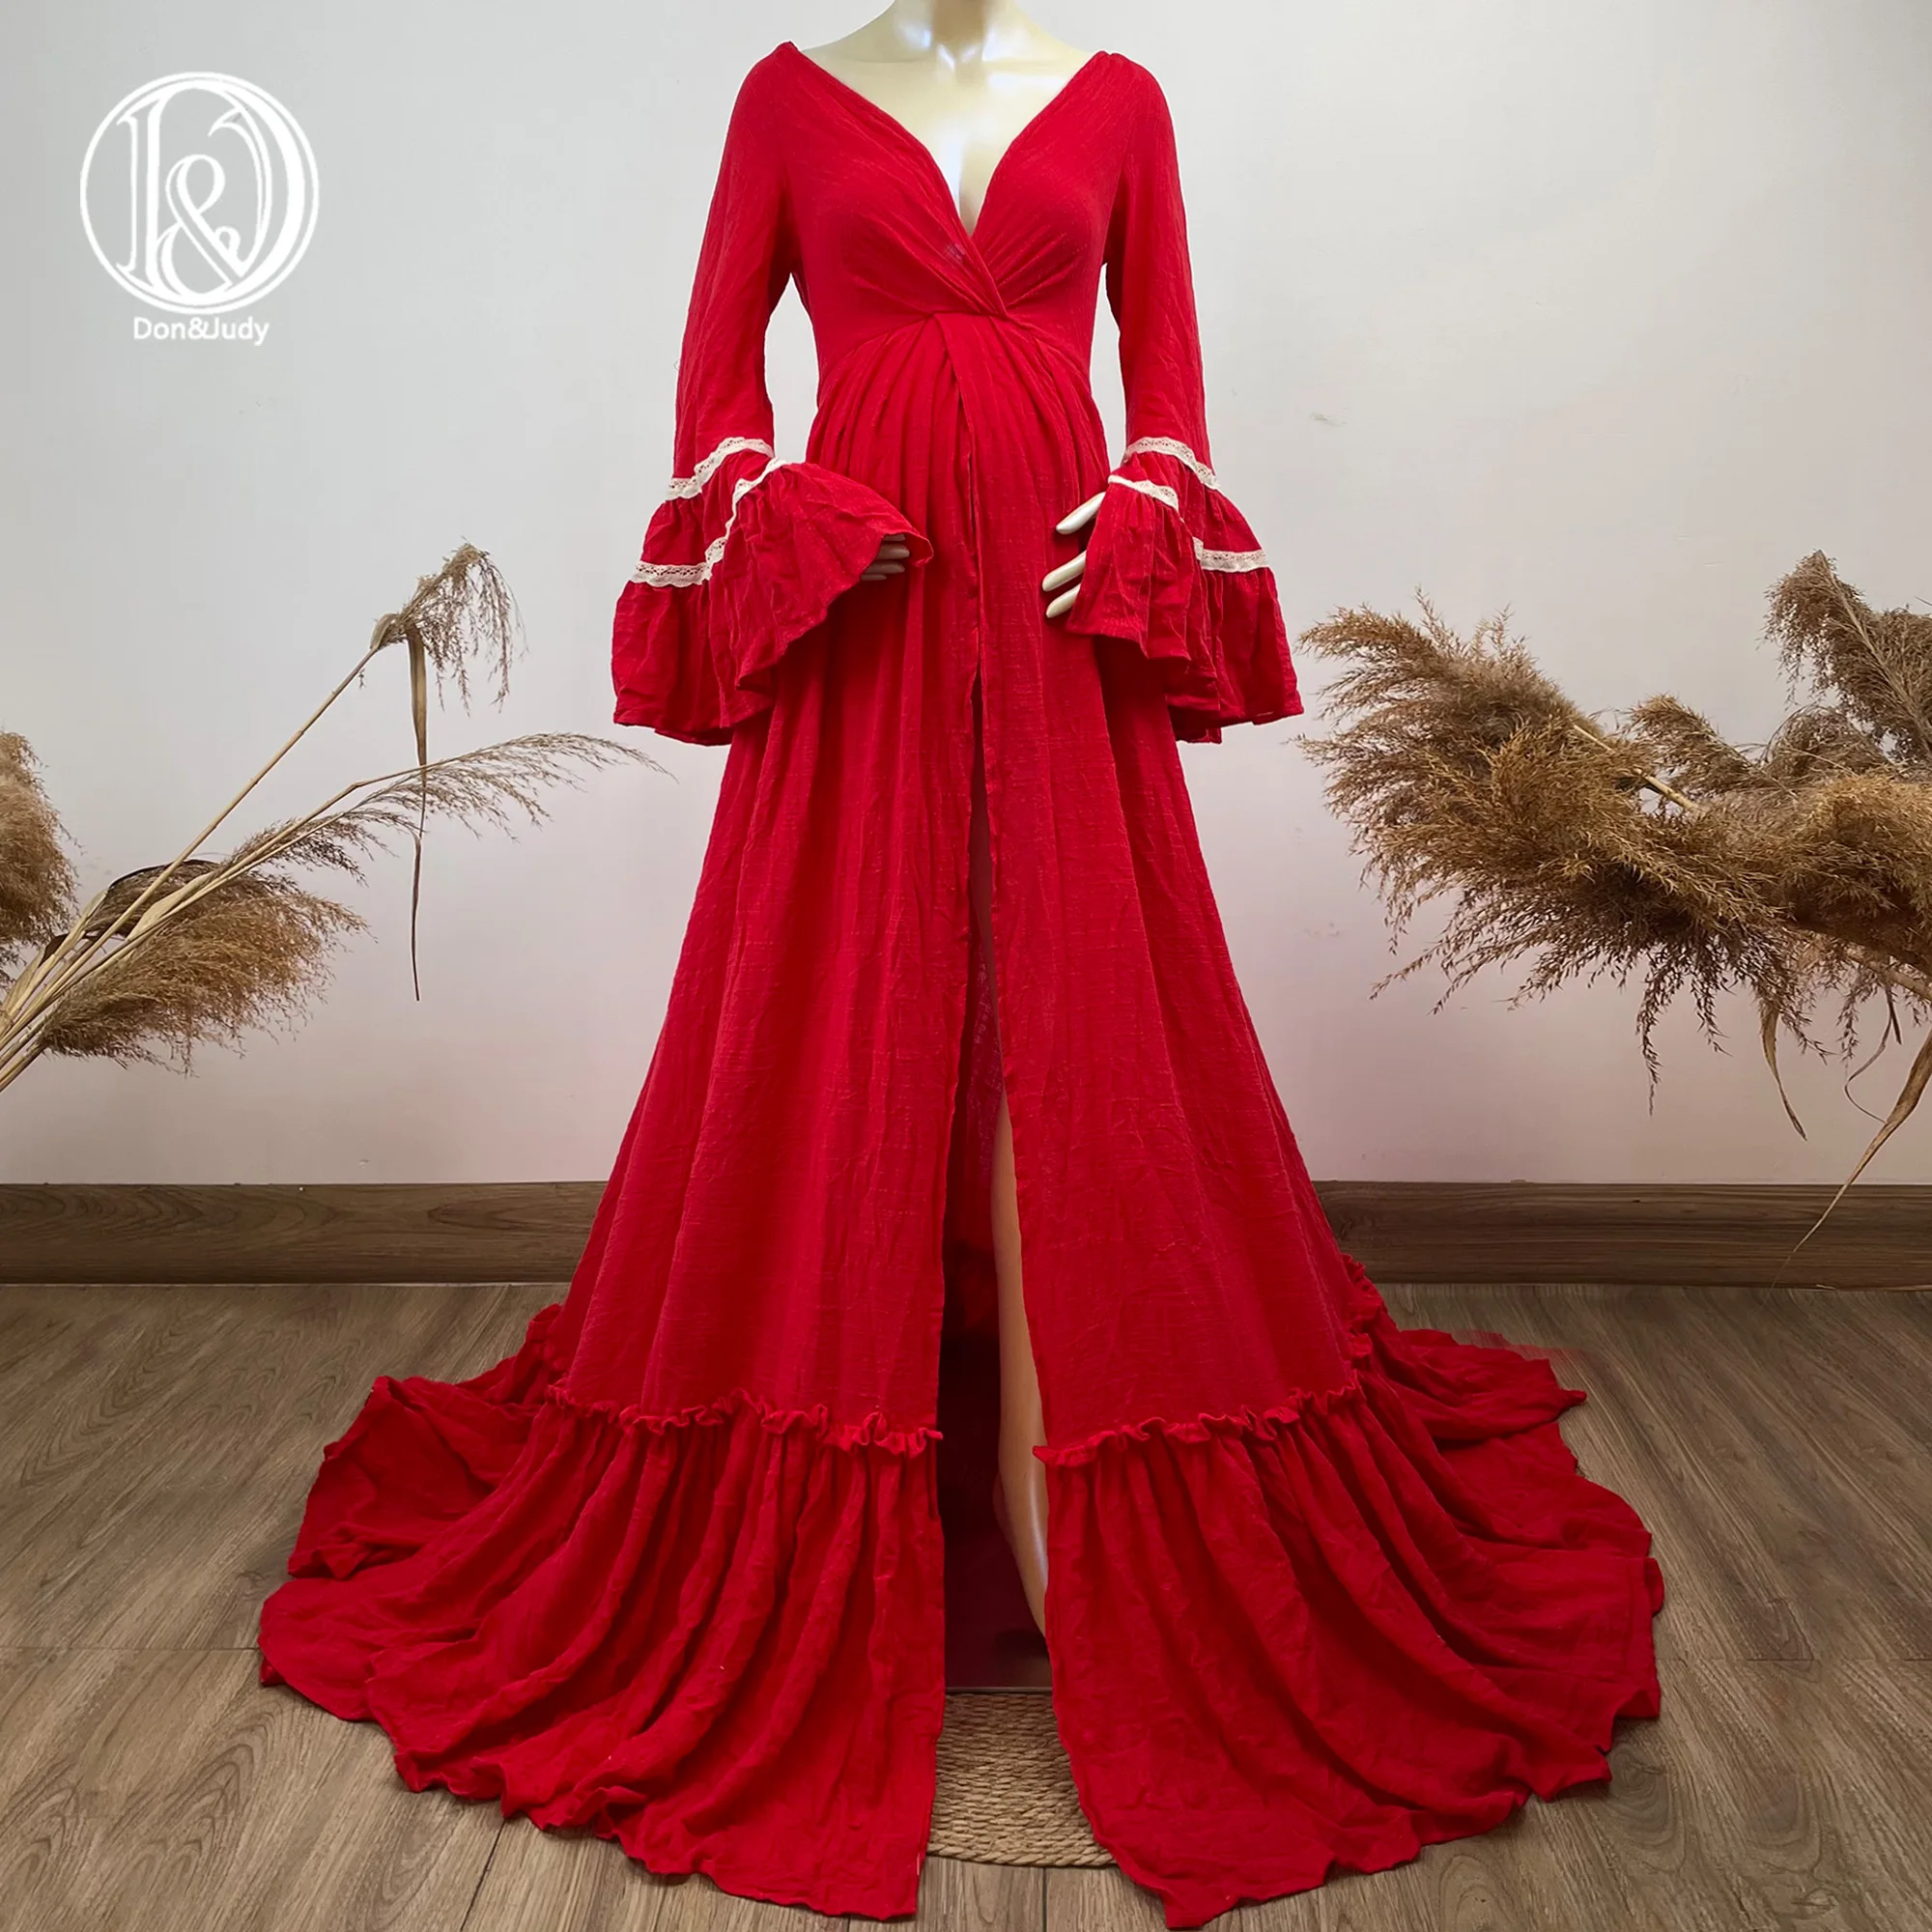 Don&Judy Red Flare Sleeves Christmas Maternity Or Non Maternity Dress for Photoshoot Pregnancy Photography Prop Party Gown 2022 enlarge